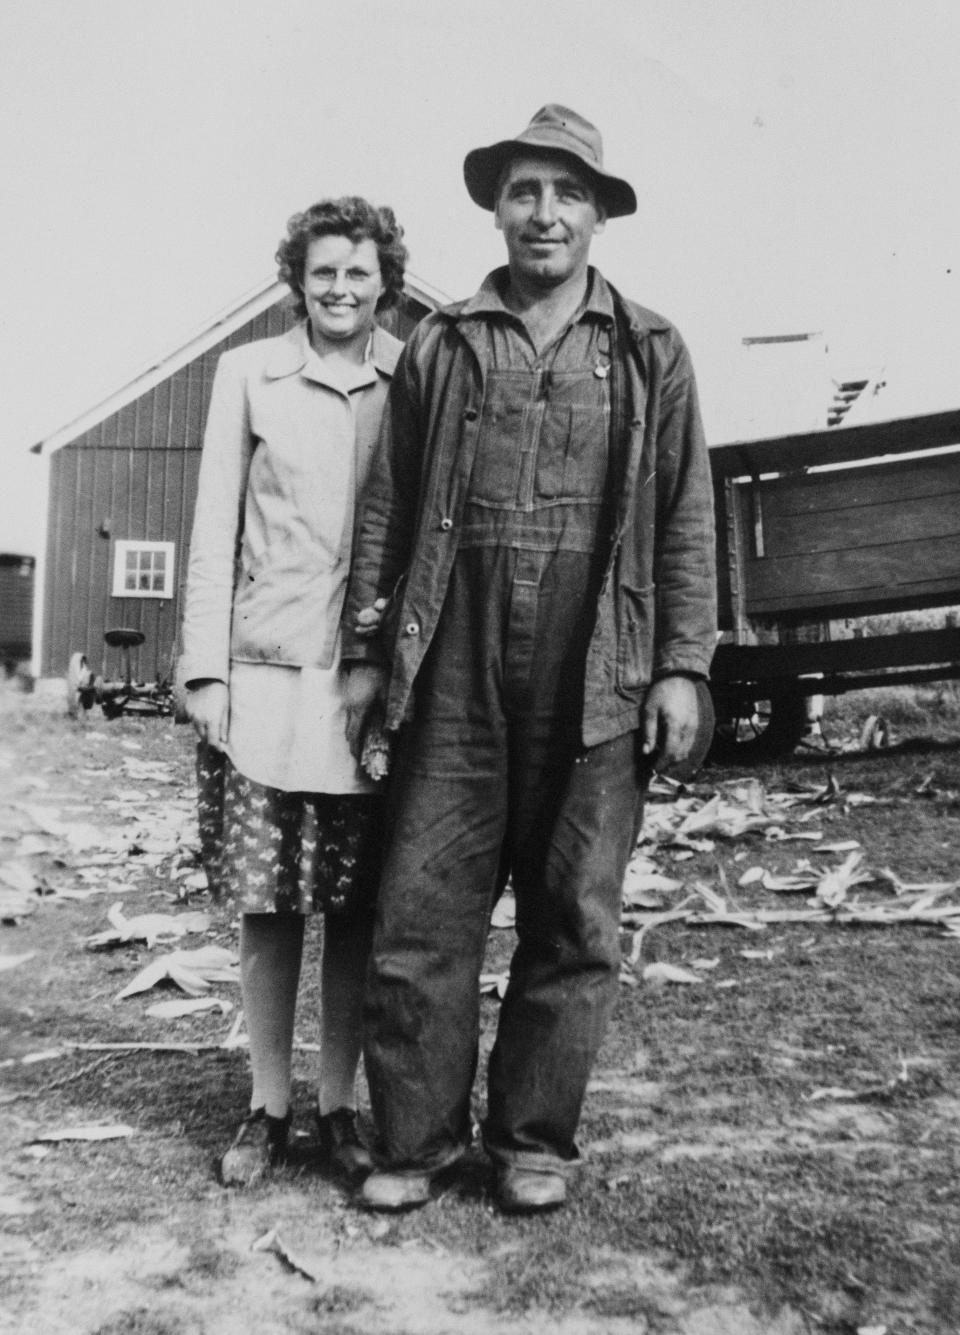 Fran and George Mehrkens, Todd Mehrkens' grandparents, are shown in this family photo from the early 1930s.